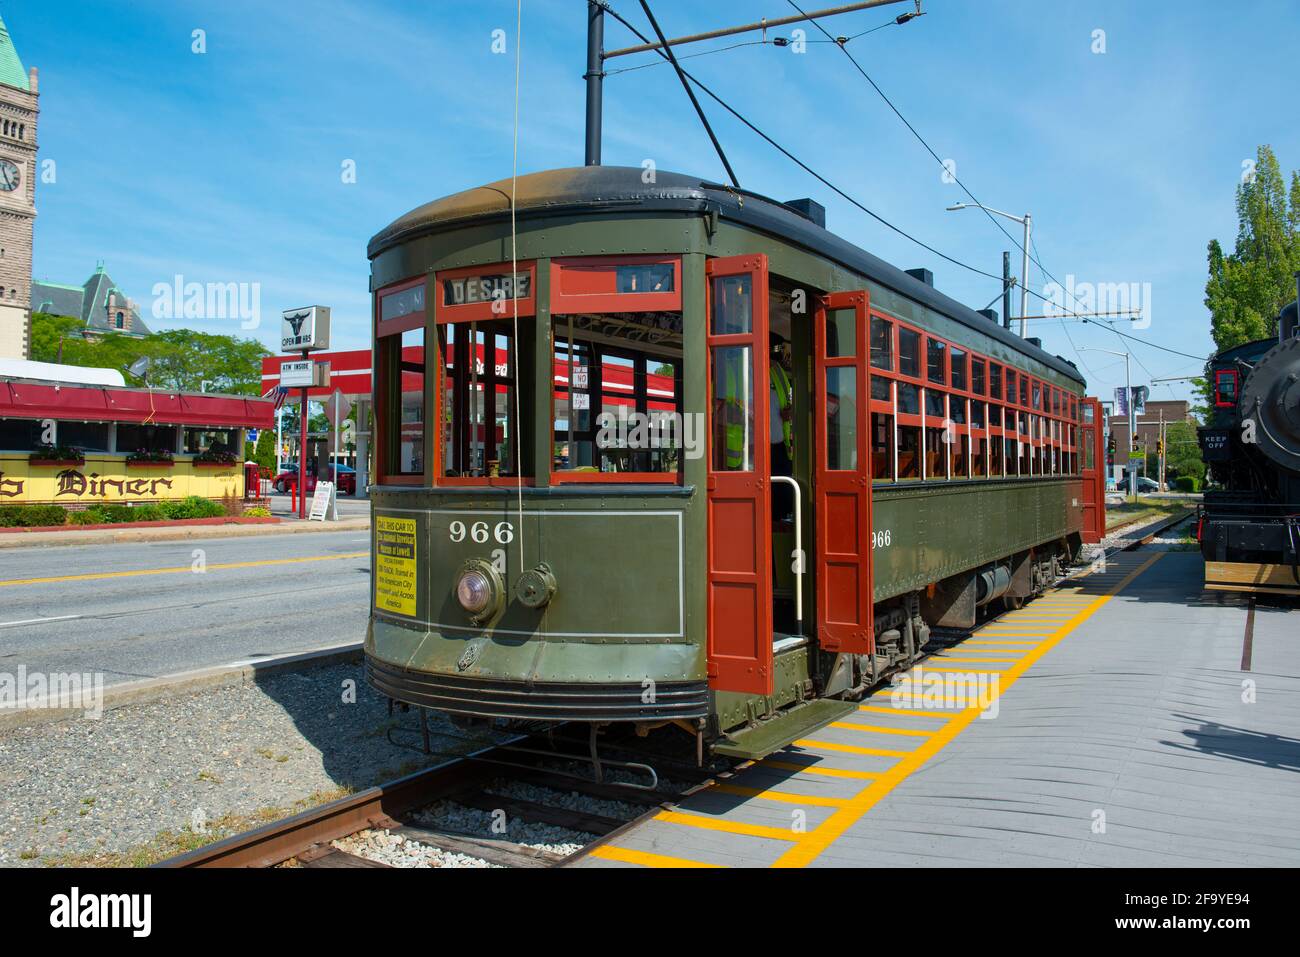 New Orleans Streetcar #966 at National Streetcar Museum on Dutton Street in Downtown Lowell, Massachusetts, MA, USA. Stock Photo